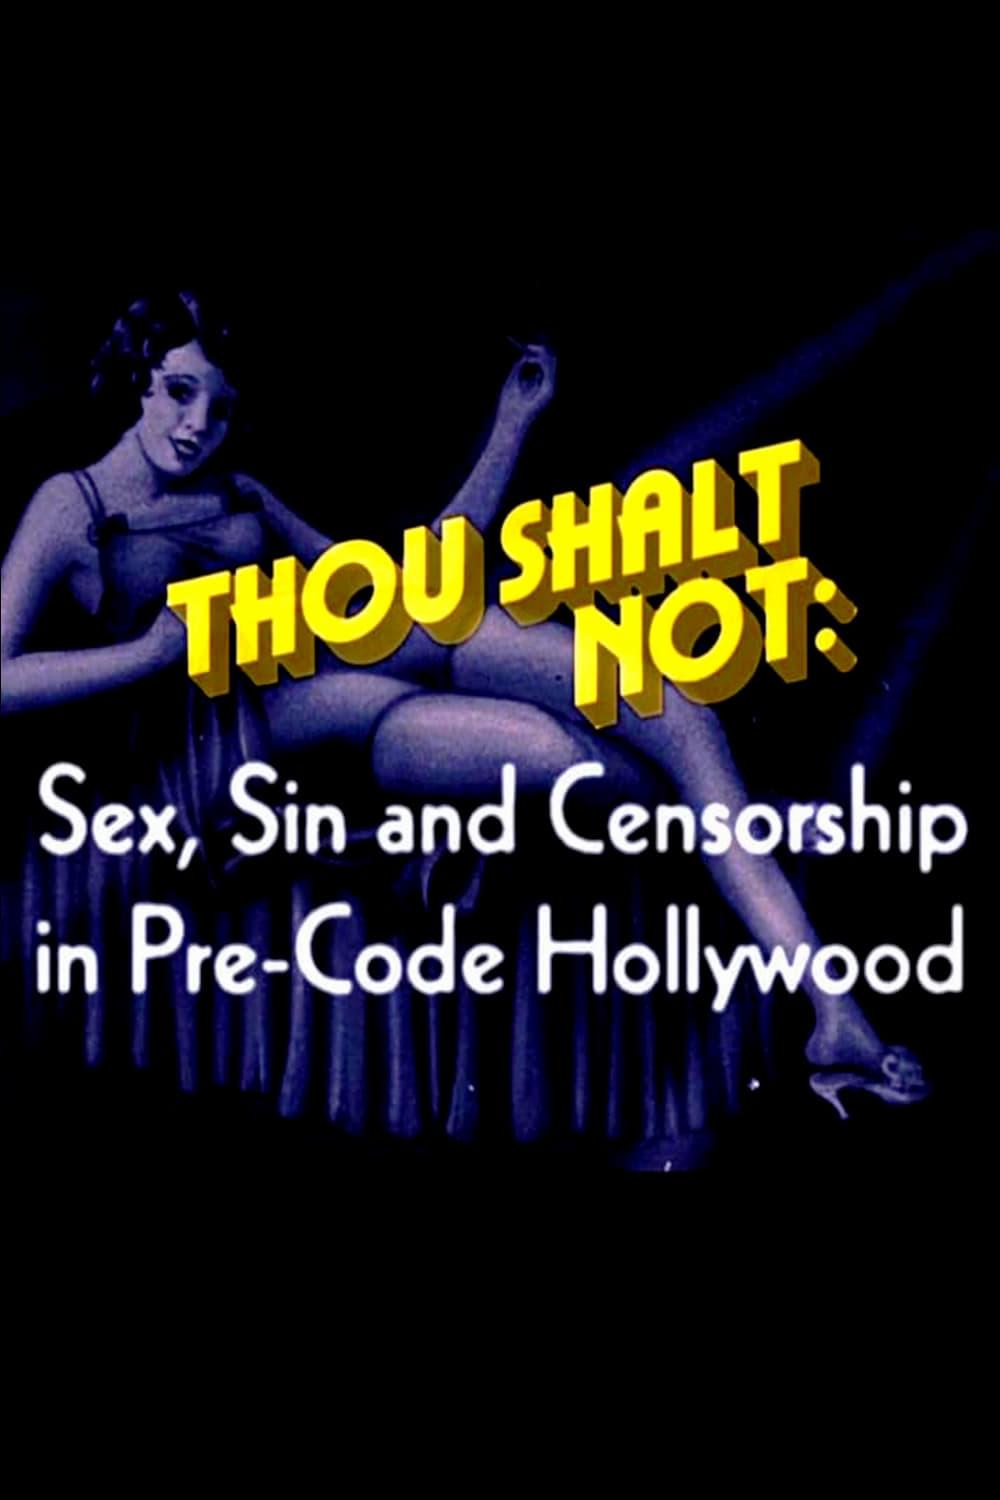 Thou Shalt Not: Sex, Sin and Censorship in Pre-Code Hollywood poster